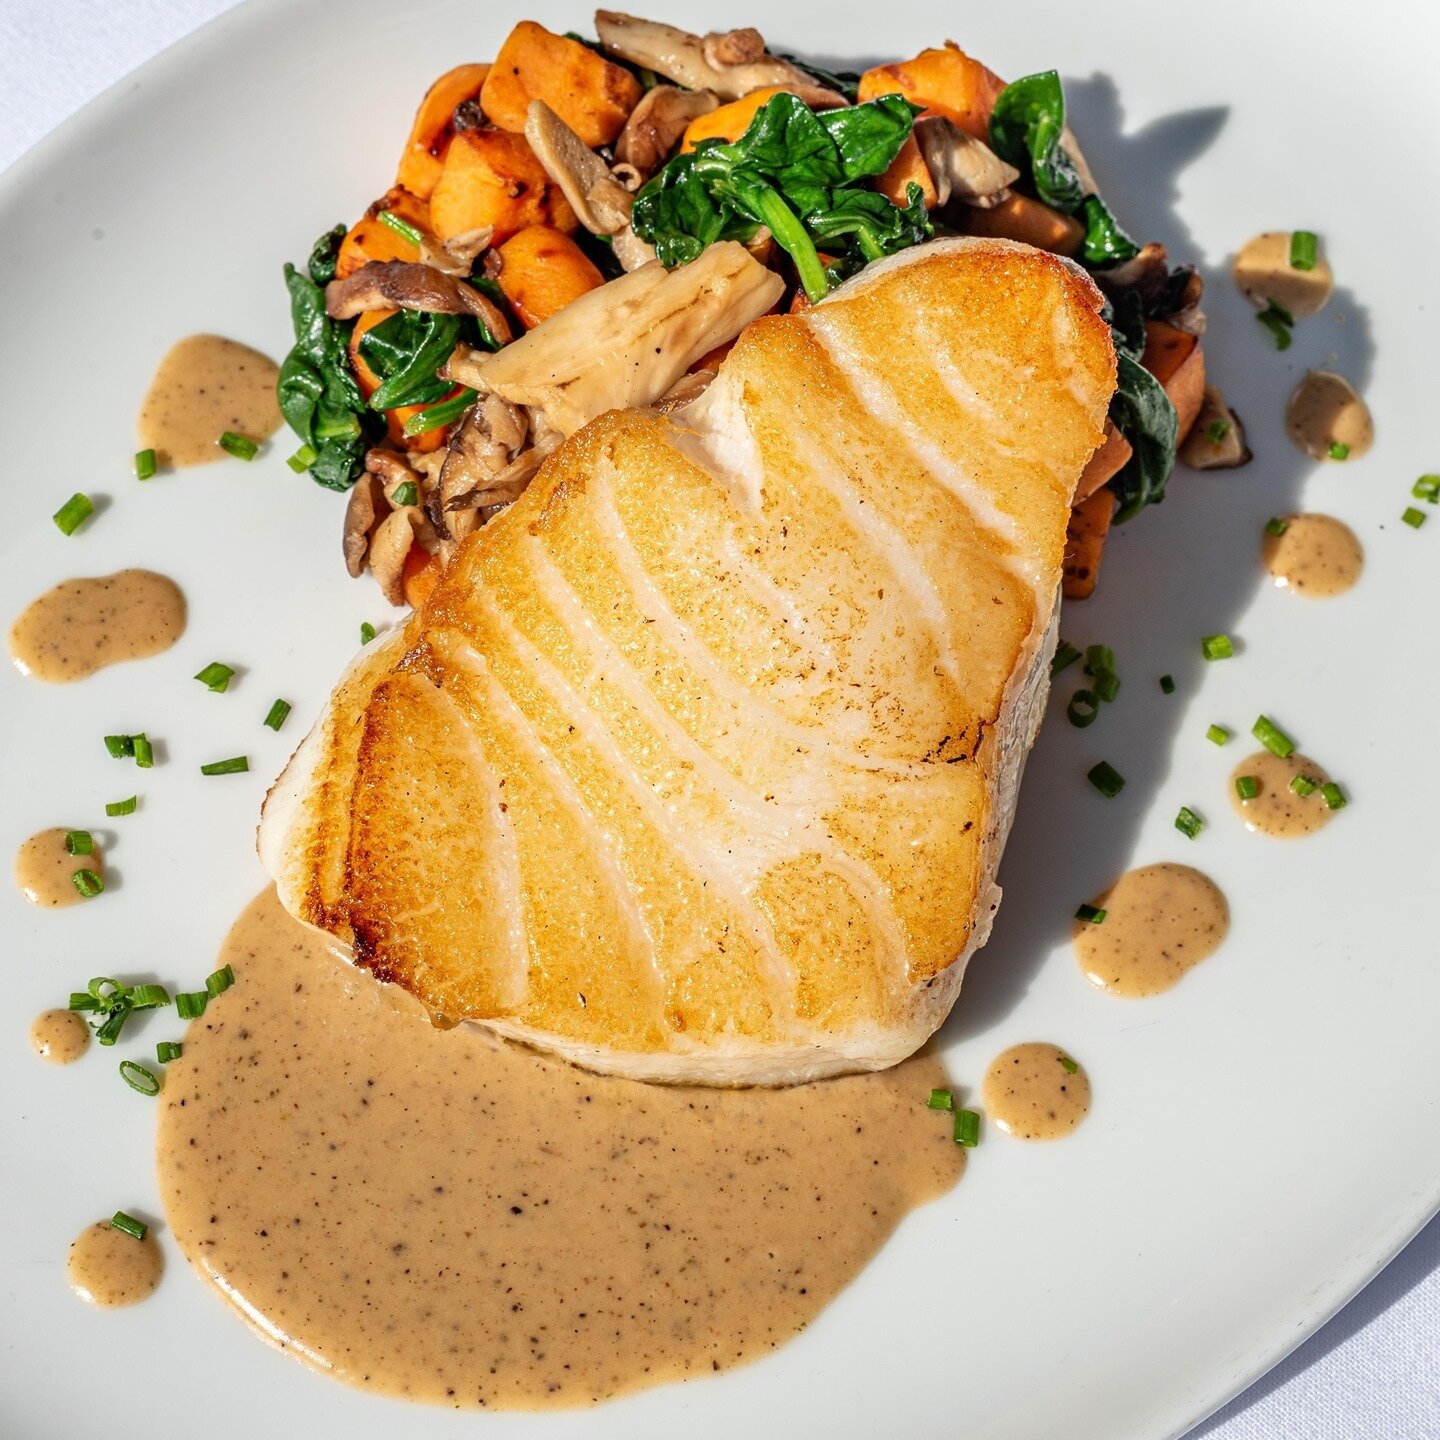 This Friday's Lenten Special is...⁠
⁠
Chilean Sea Bass with roasted sweet potatoes, wild mushrooms, saut&eacute;ed spinach, in a truffle vinaigrette!⁠
⁠
Dine with us tonight, don't forget to book your reservation!⁠
⁠
#special #fishspecial #featuredfi